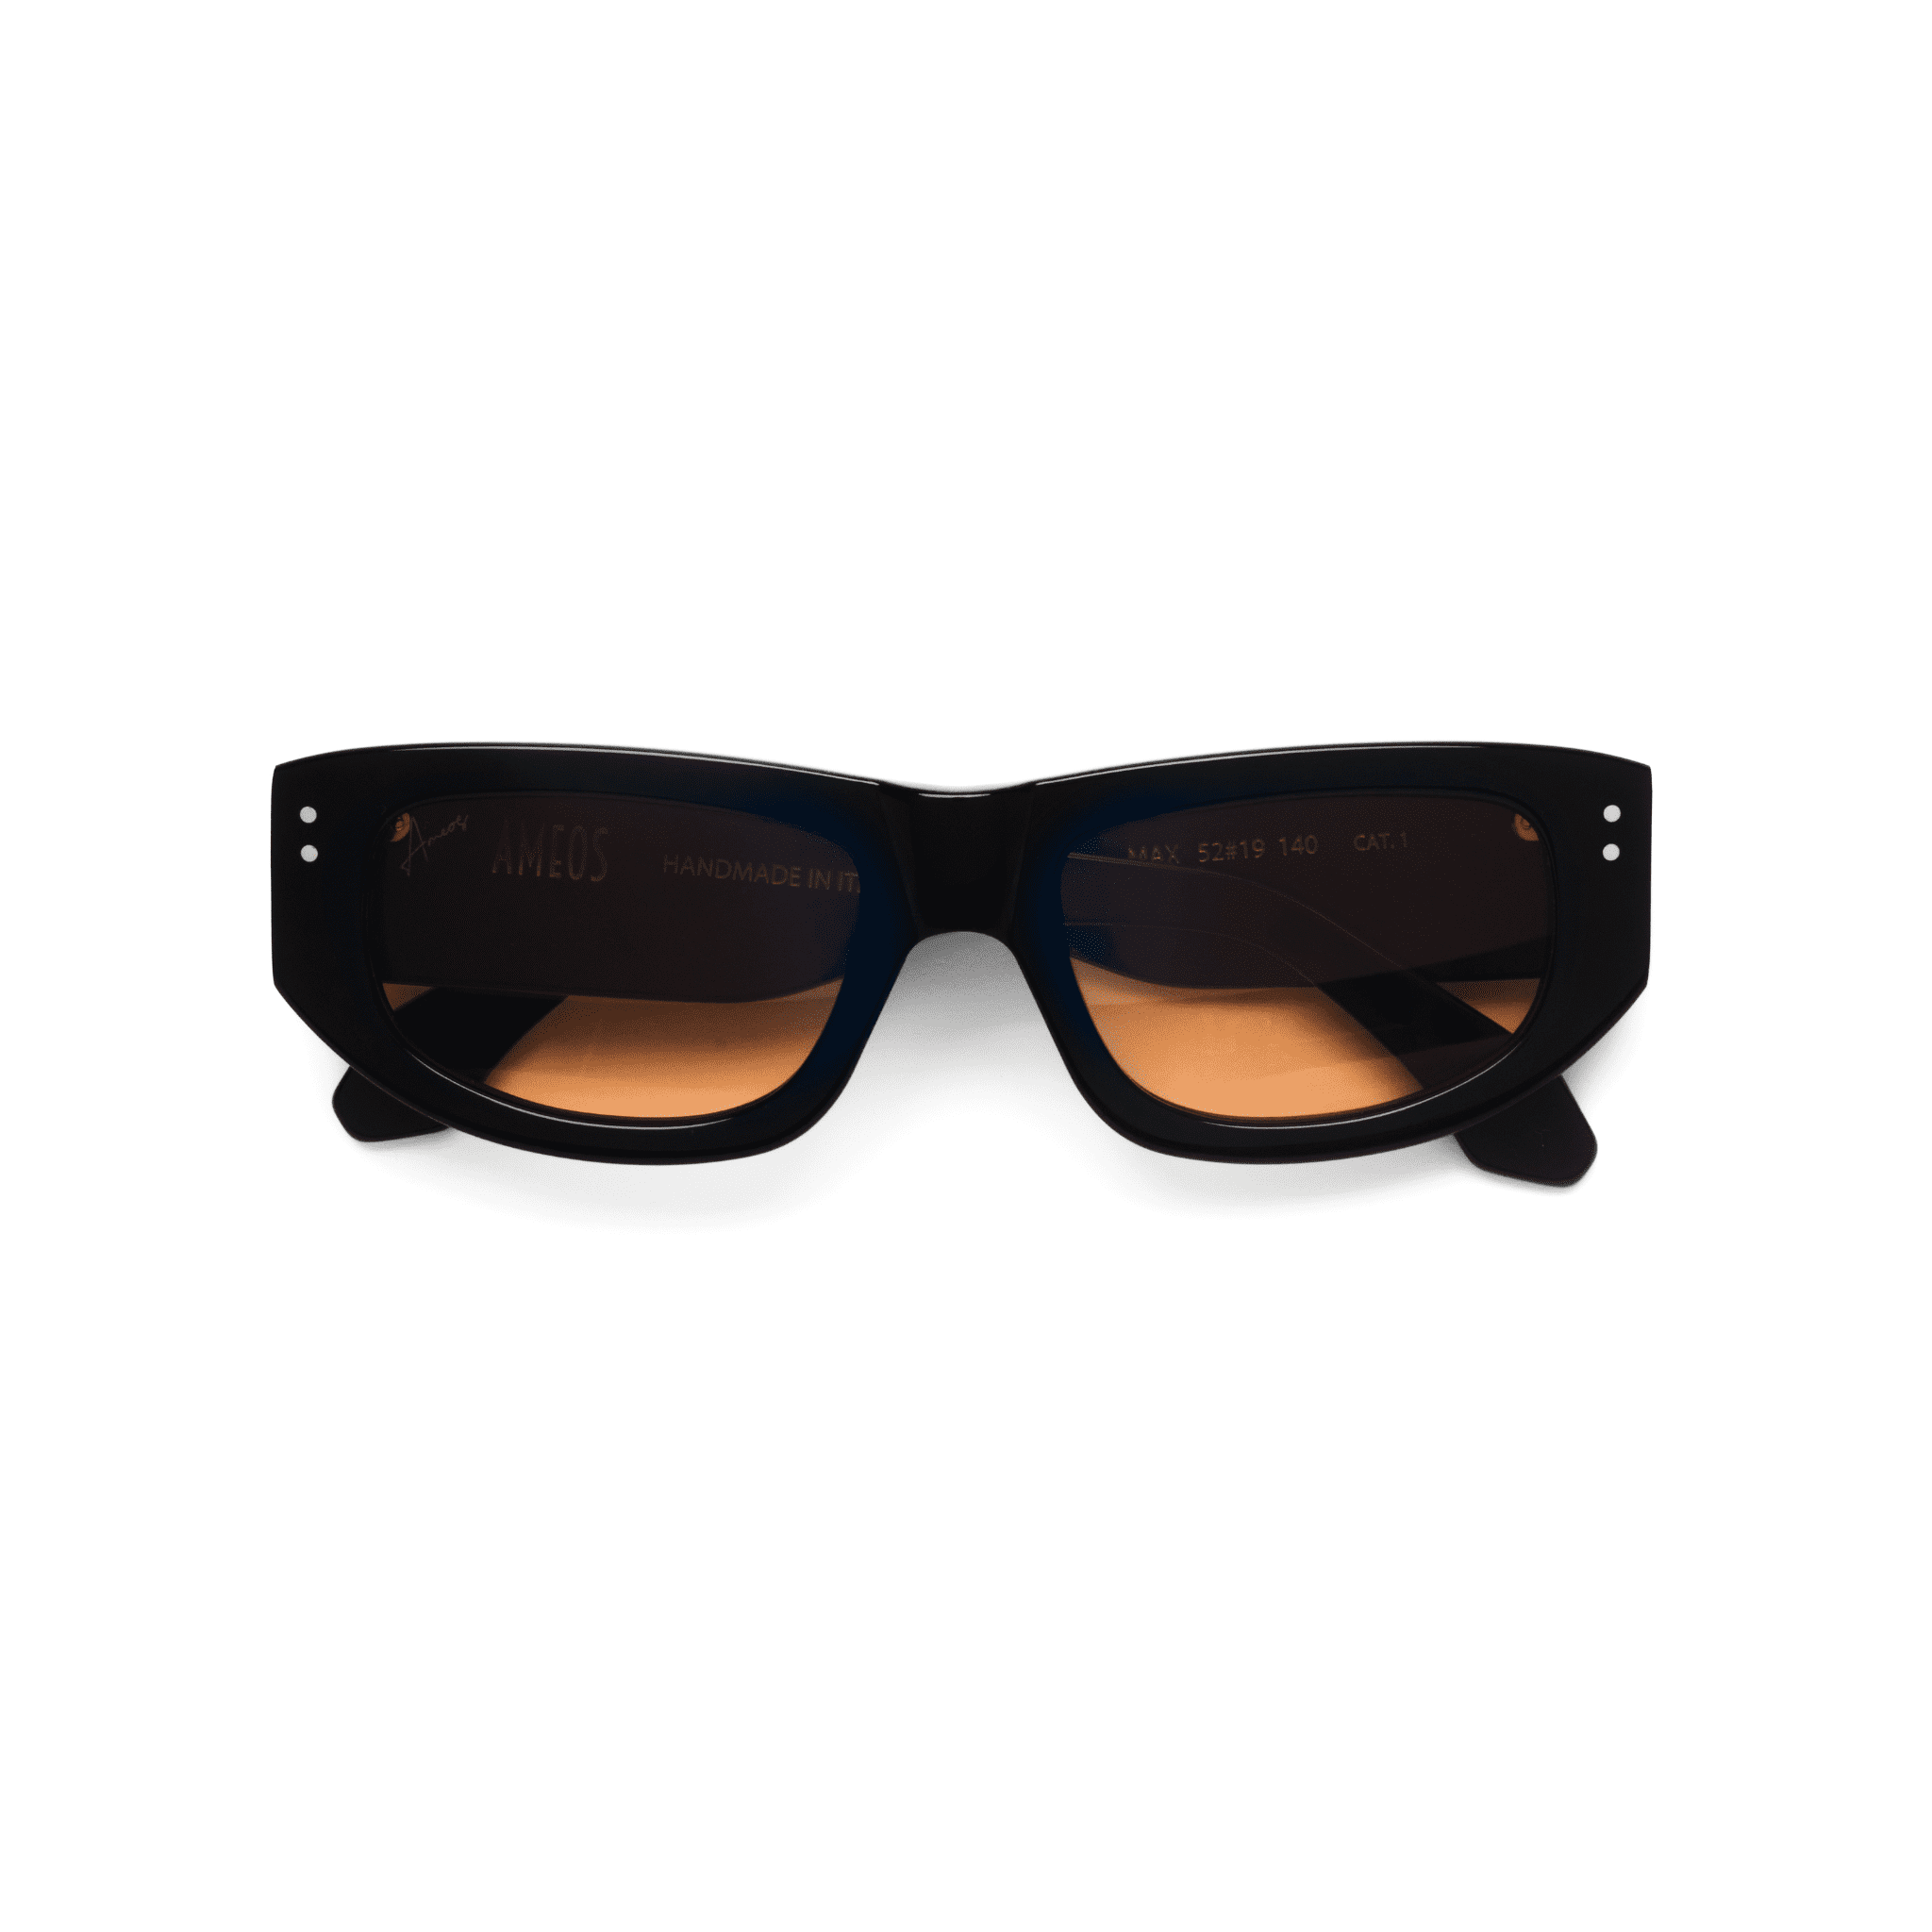 Ameos Forever collection Max model. Black frames with orange lenses. Front view temples crossed. Genderless, gender neutral eyewear